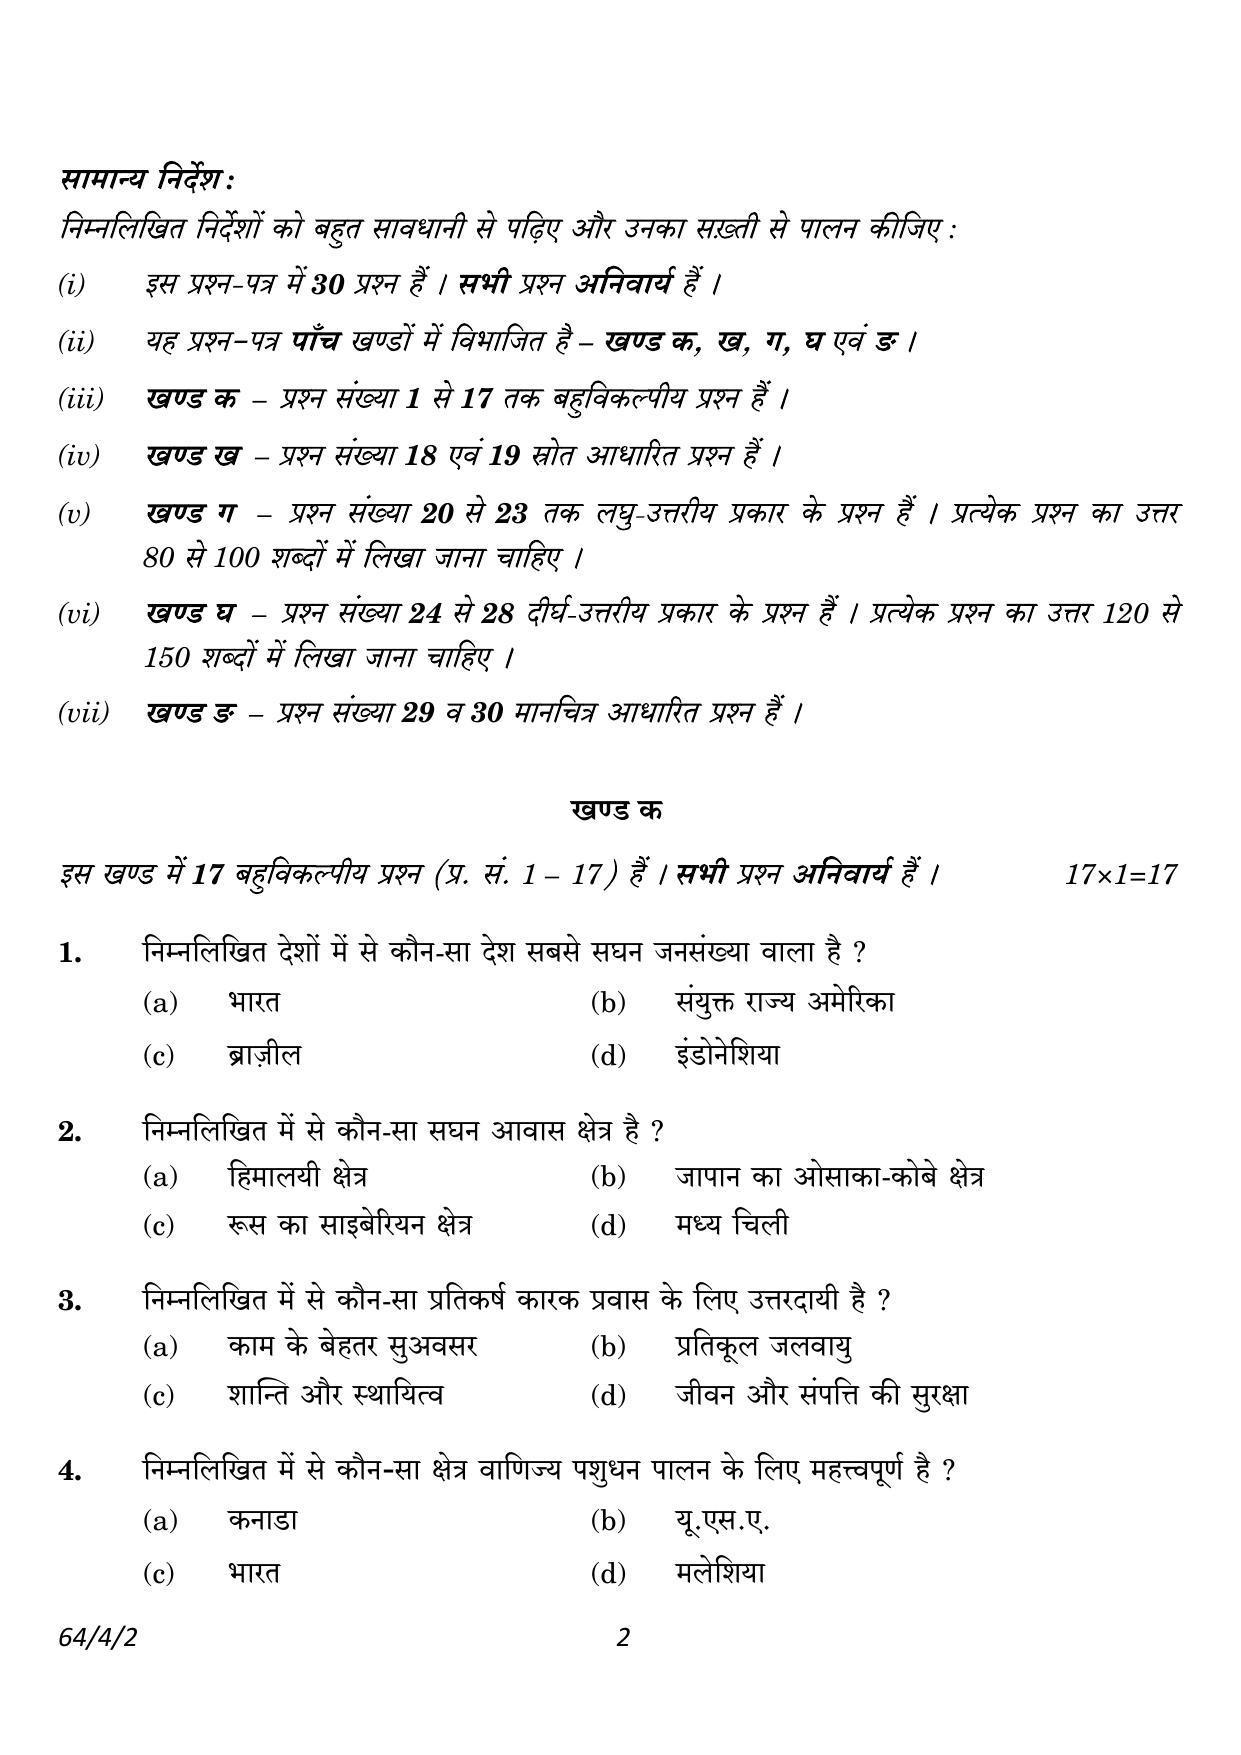 CBSE Class 12 64-4-2 Geography 2023 Question Paper - Page 2